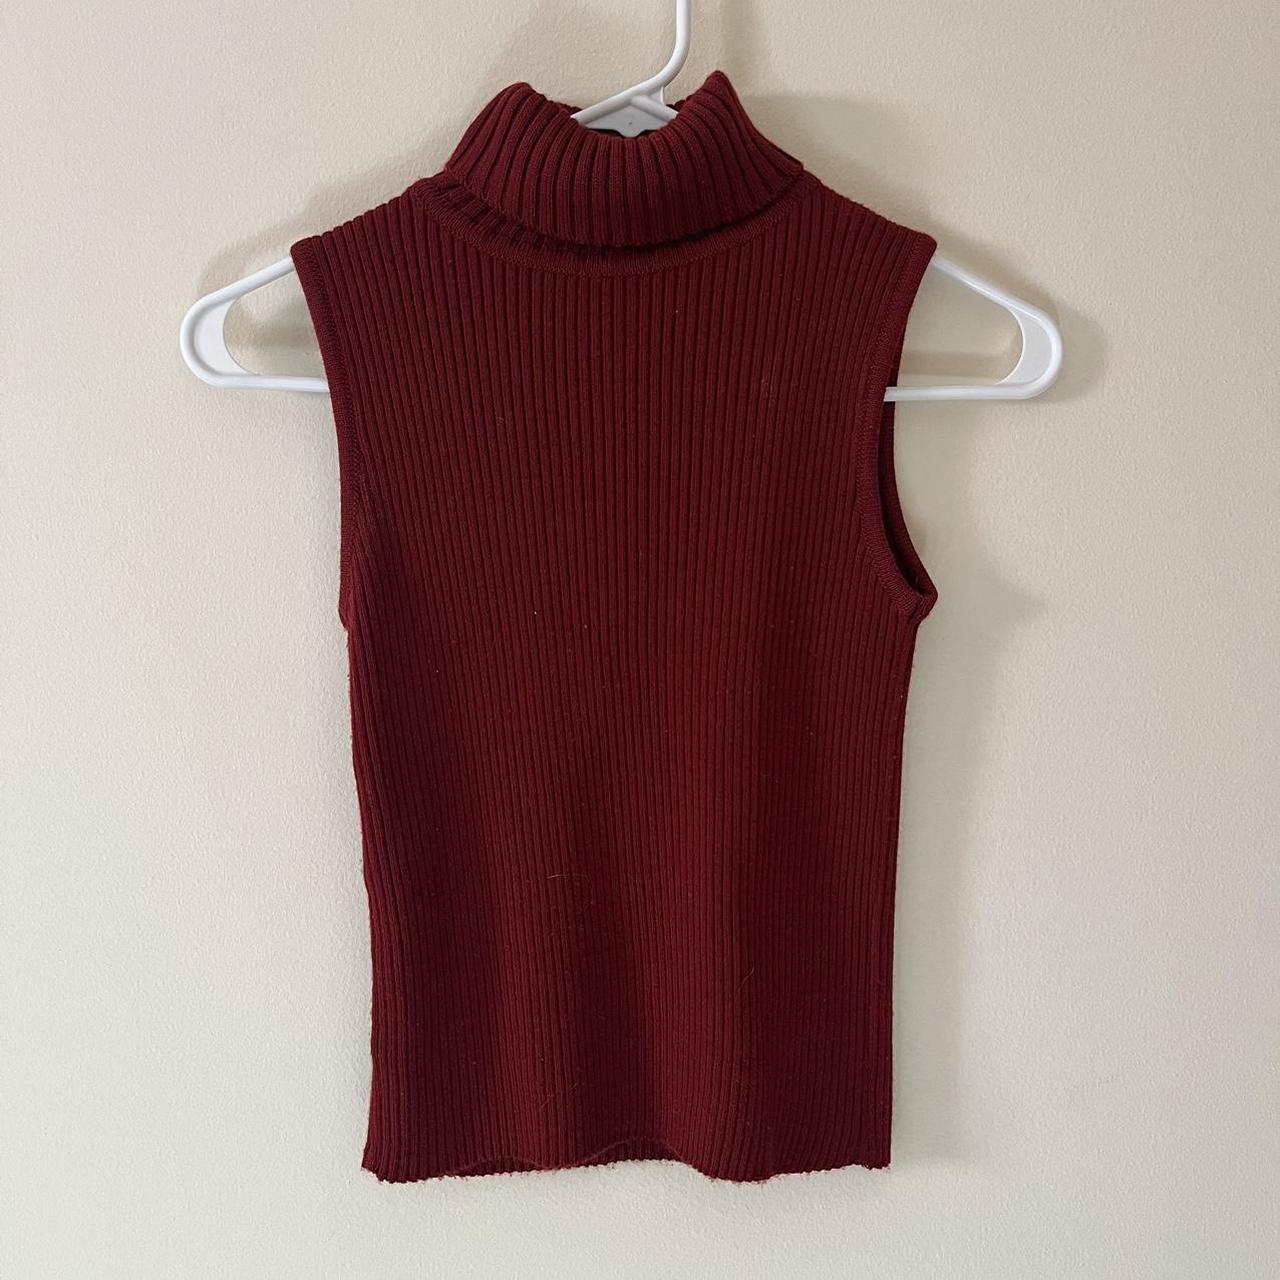 Red turtleneck ribbed tank sweater vintage from the... - Depop